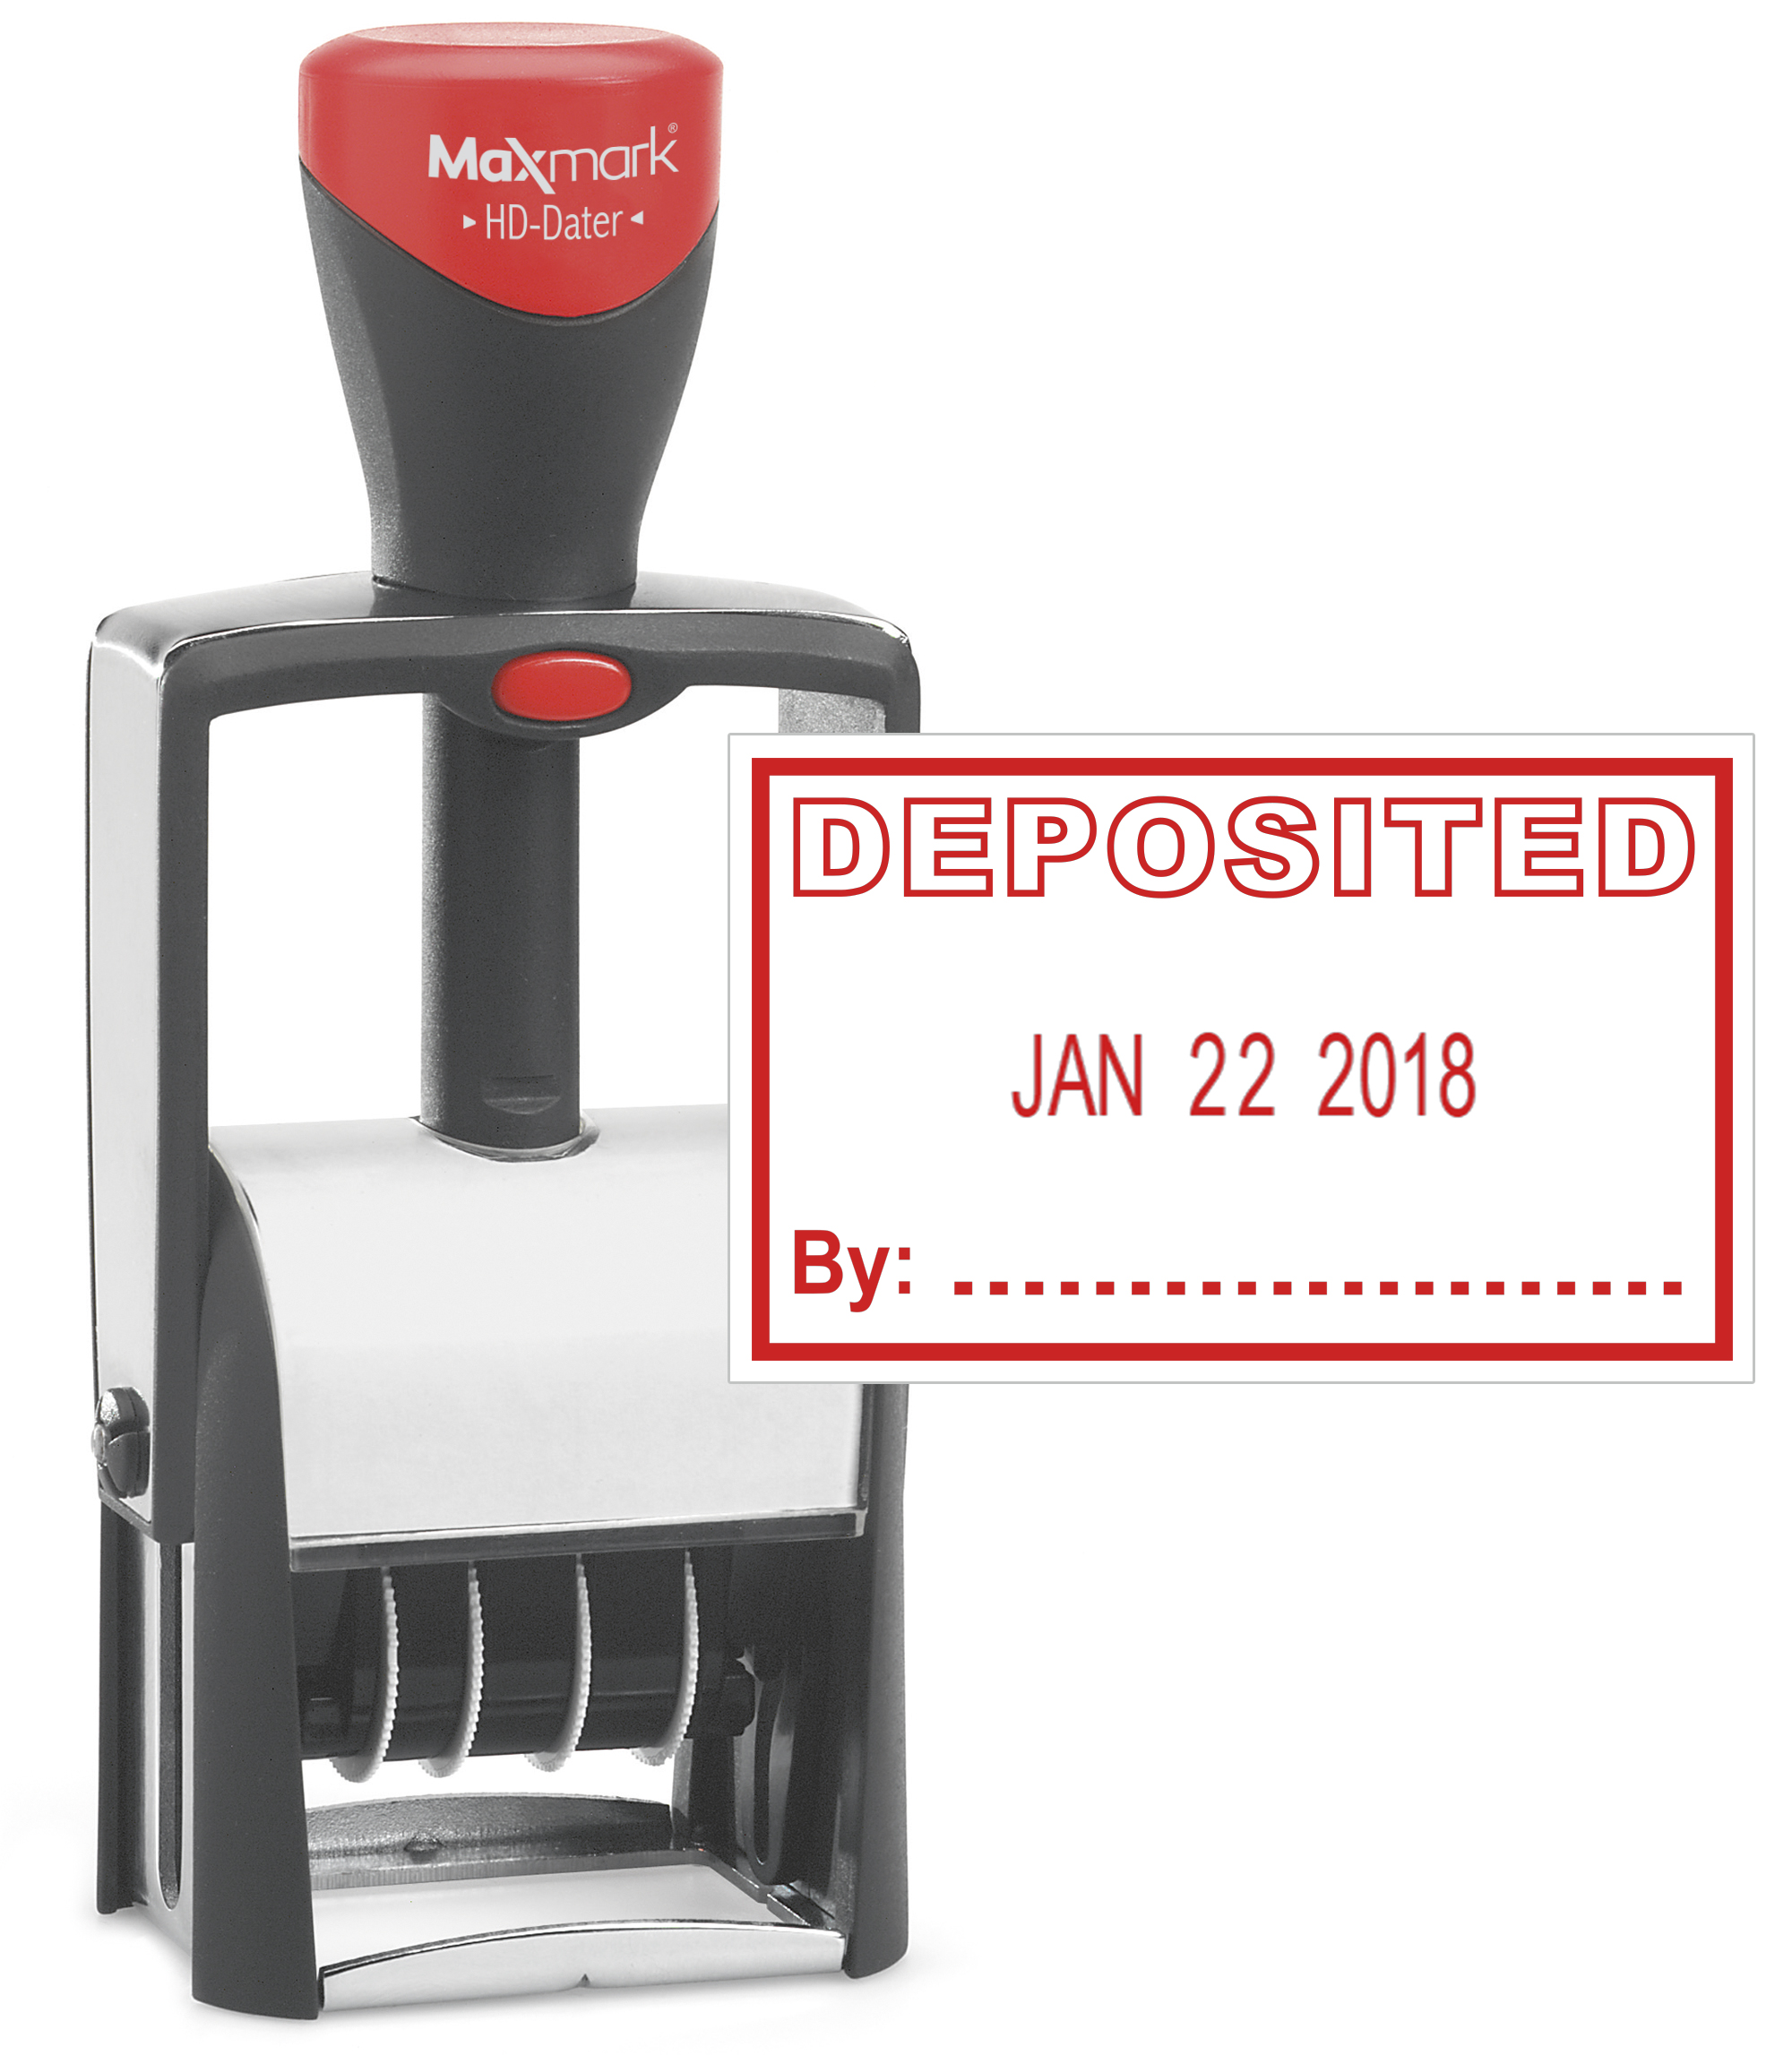 Heavy Duty Date Stamp with "DEPOSITED" Self Inking Stamp - RED Ink